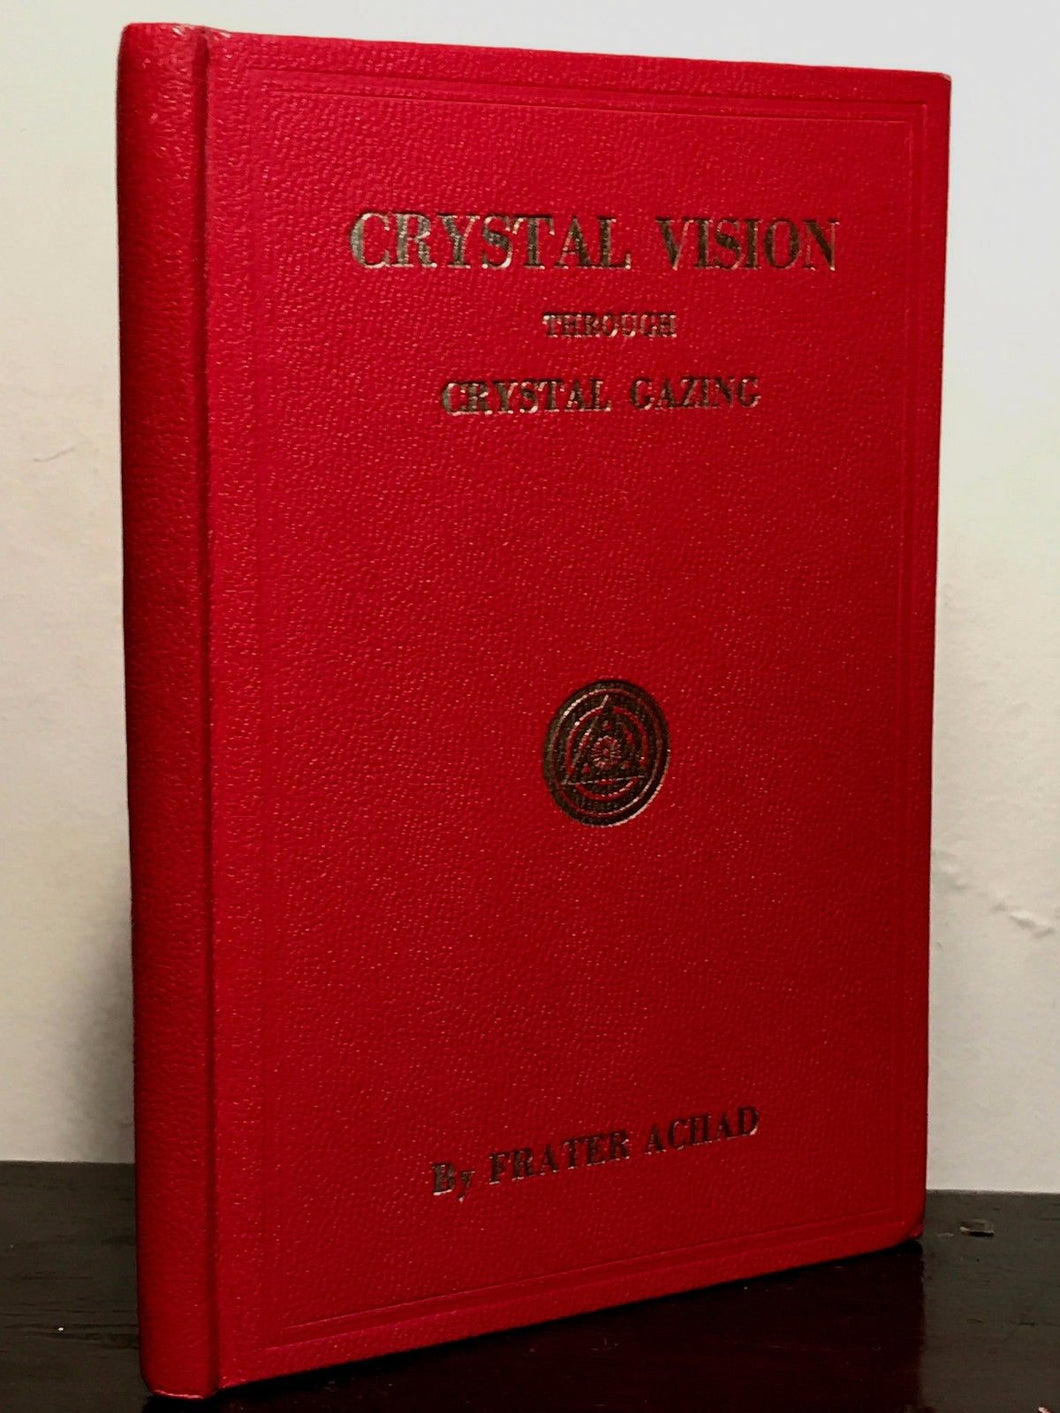 CRYSTAL VISION THROUGH CRYSTAL GAZING, Frater Achad, 1st/1st 1976, 1923 Reprint